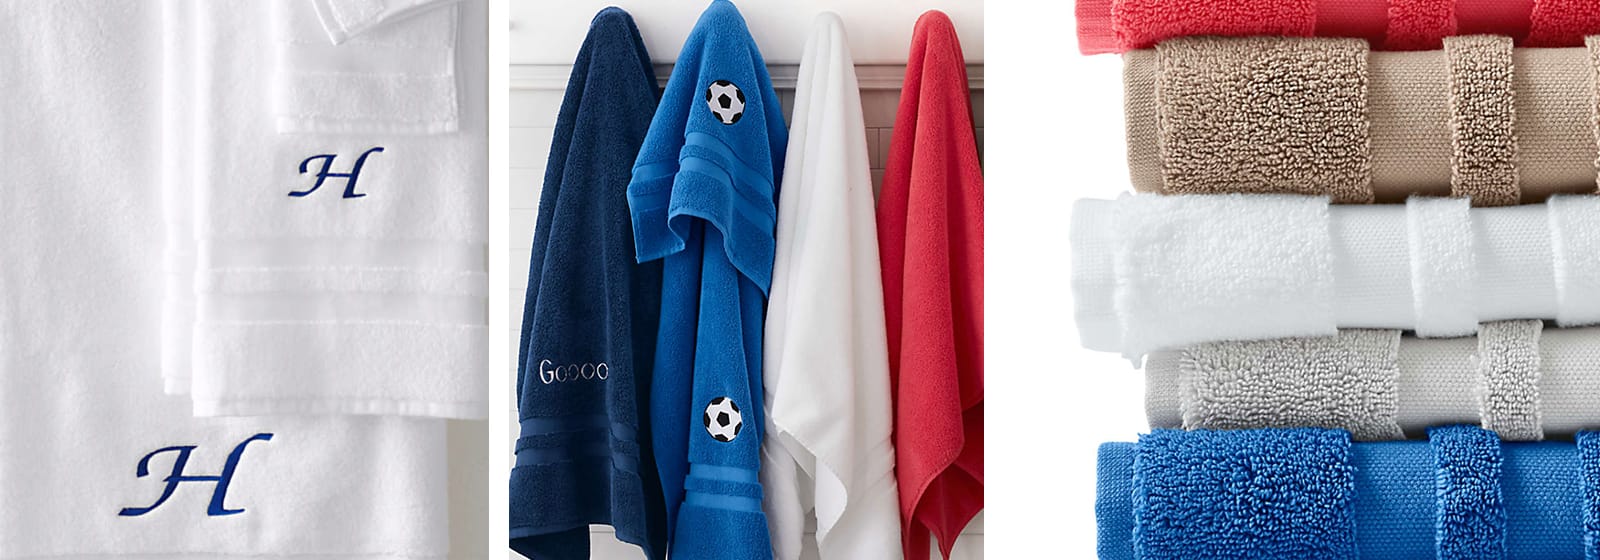 Impress Your Guests with Soft Spa Towels